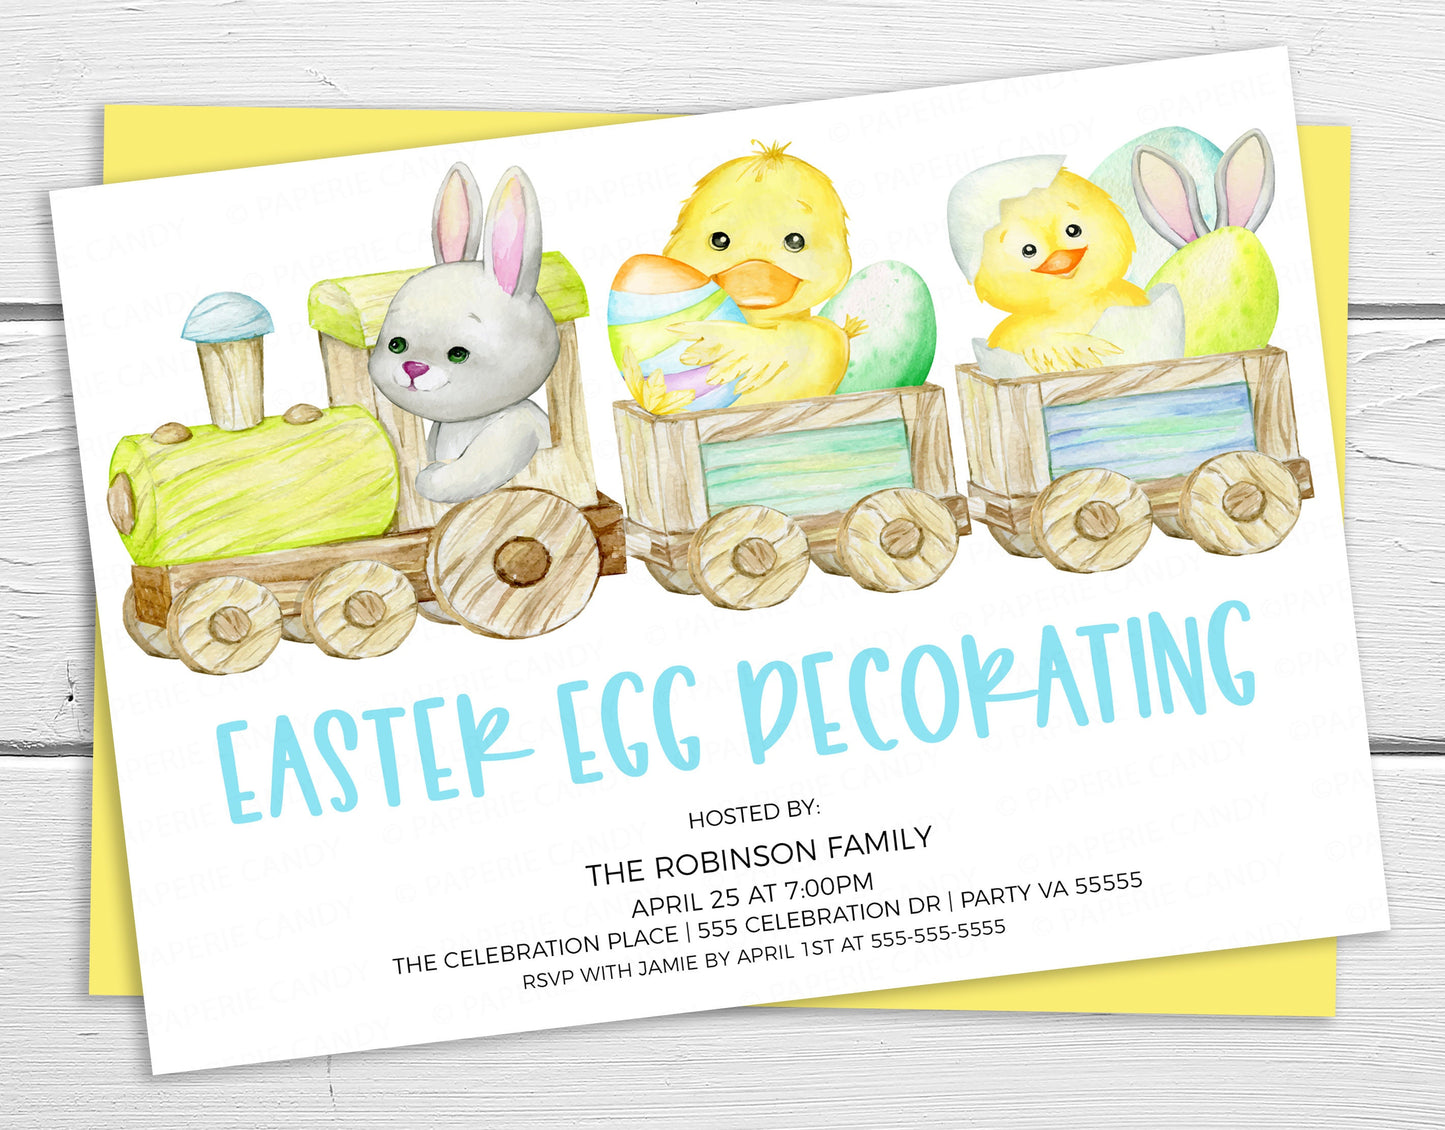 Easter Egg Decorating Invitation, Easter Party Invite, Kids Easter Party, Neighborhood Company Business Egg Decorating, Editable Printable